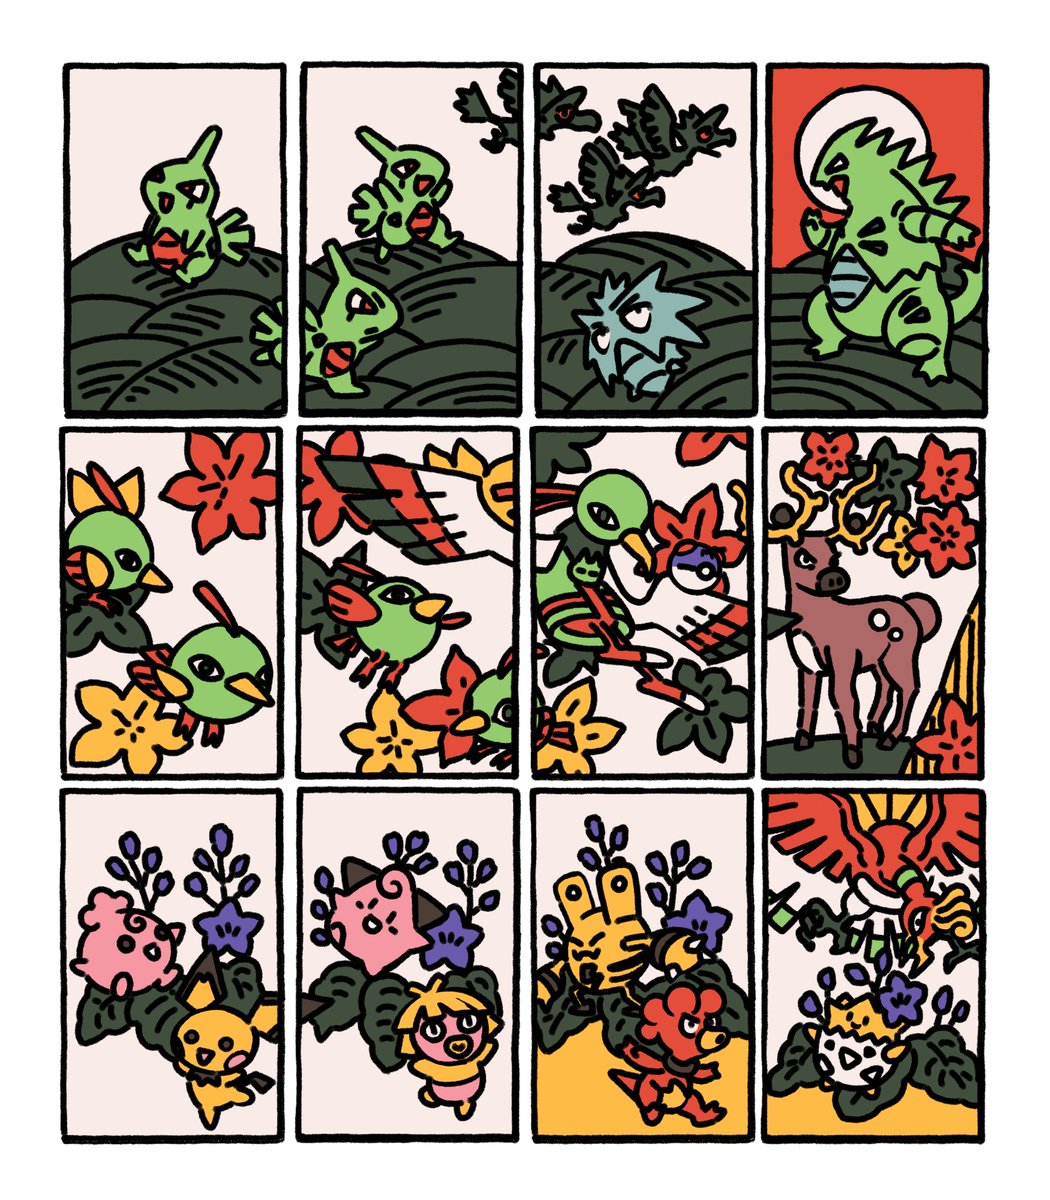 The Hanafuda set is finally complete! I can start test printing now 